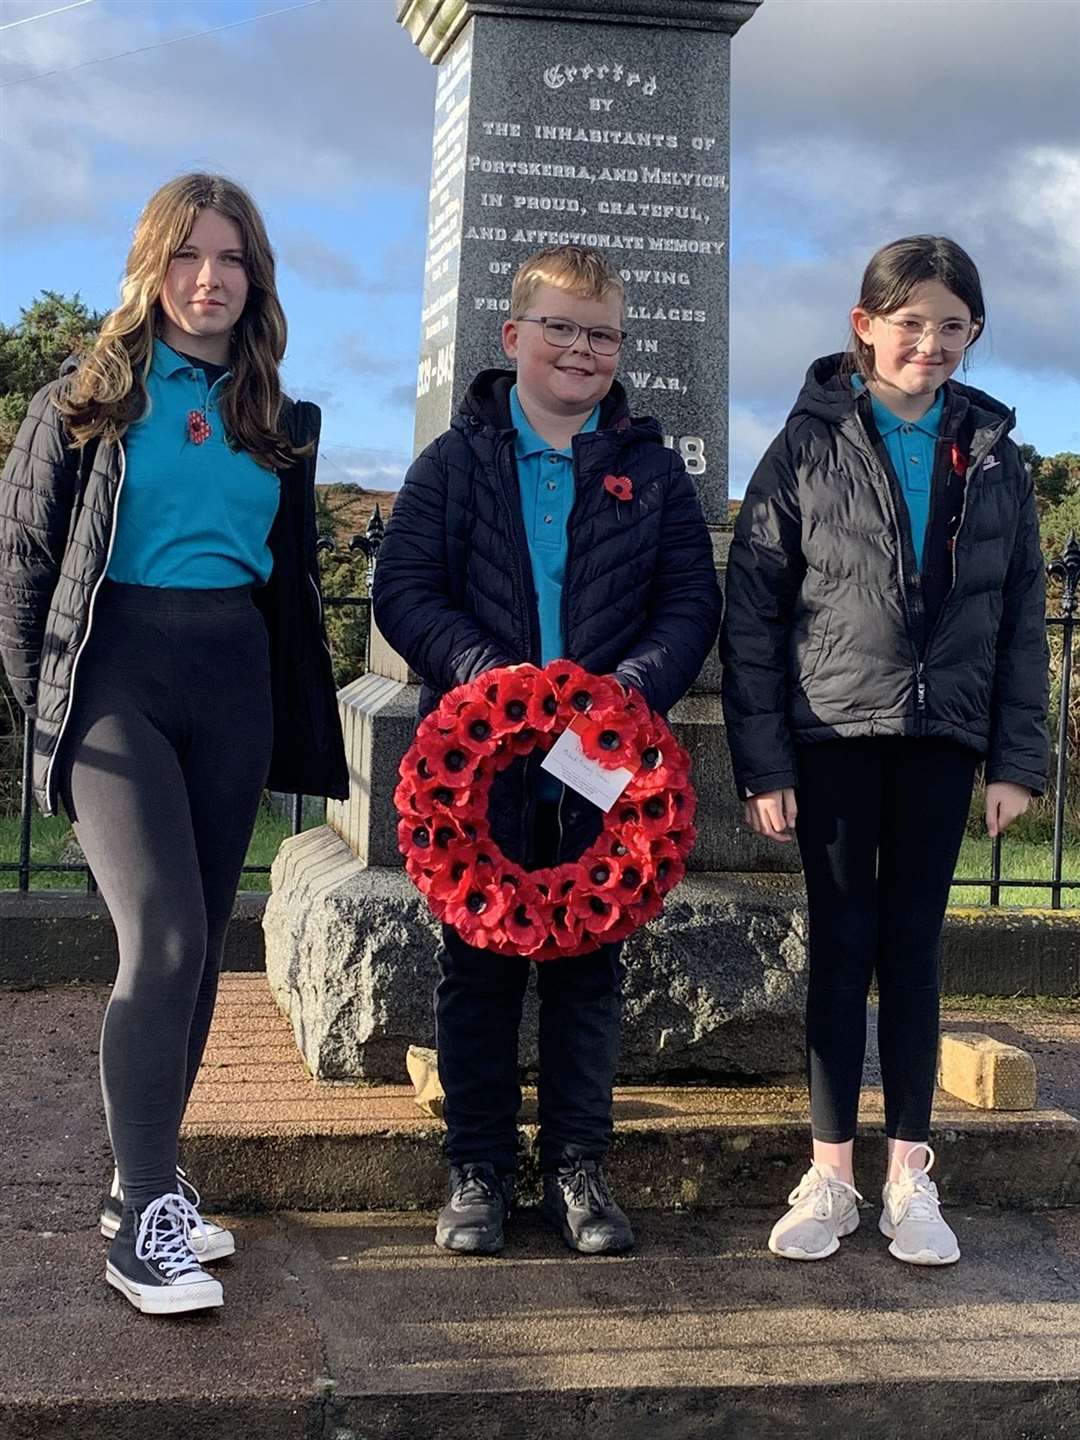 The school's house captains (from left) Kamryn Mackay, Matthew MacKintosh and Emily Farquhar laid a wreath in memory of those who died in the service of their country.